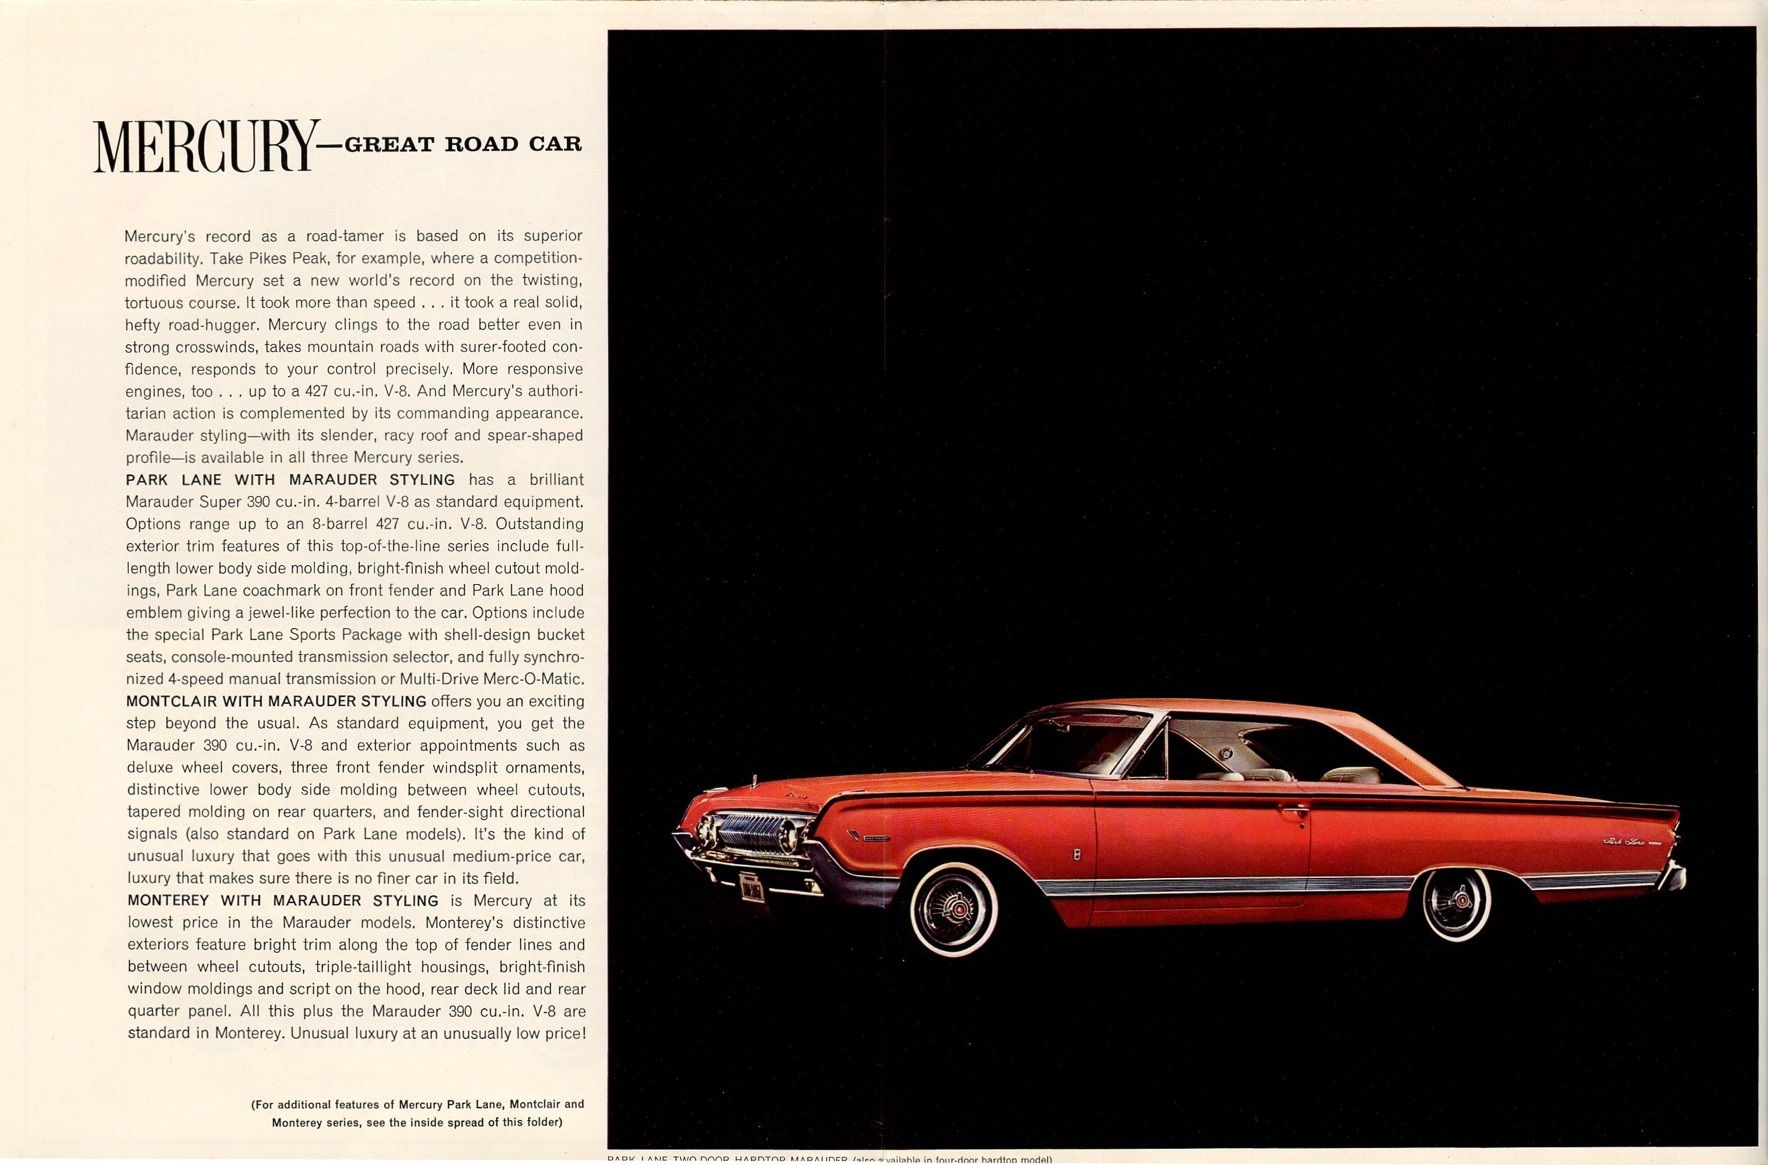 1964 Mercury And Comet Brochure Page 6